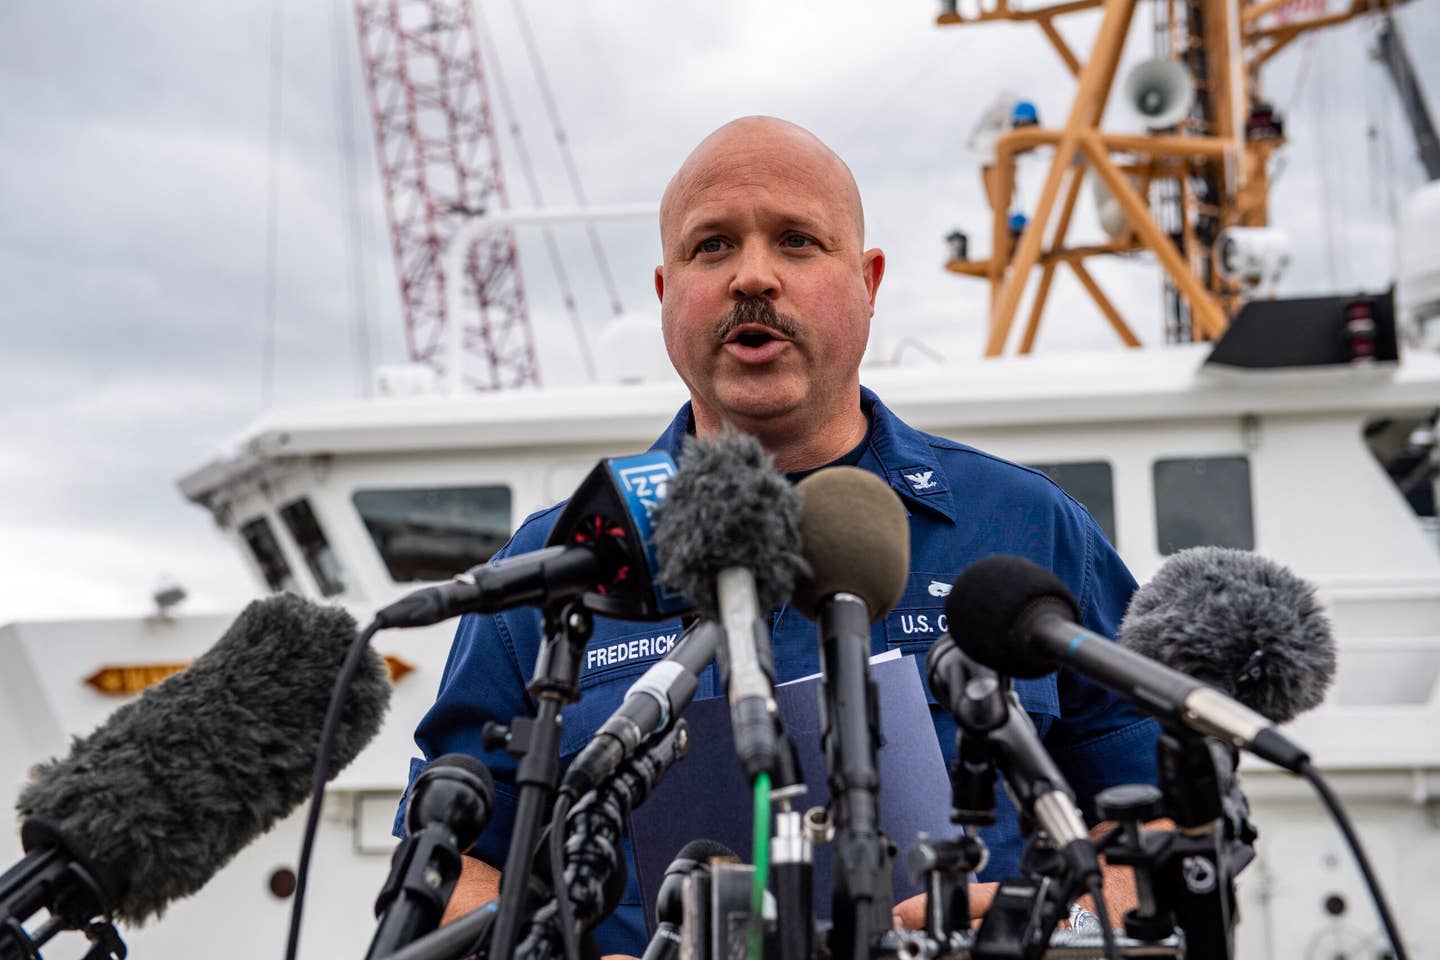 U.S. Coast Guard Captain Jamie Frederick speaks during a press conference about the search efforts for the Titan at Coast Guard Base Boston, Massachusetts, on June 20, 2023. <em>Photo by Joseph Prezioso / AFP) (Photo by JOSEPH PREZIOSO/AFP via Getty Images</em>